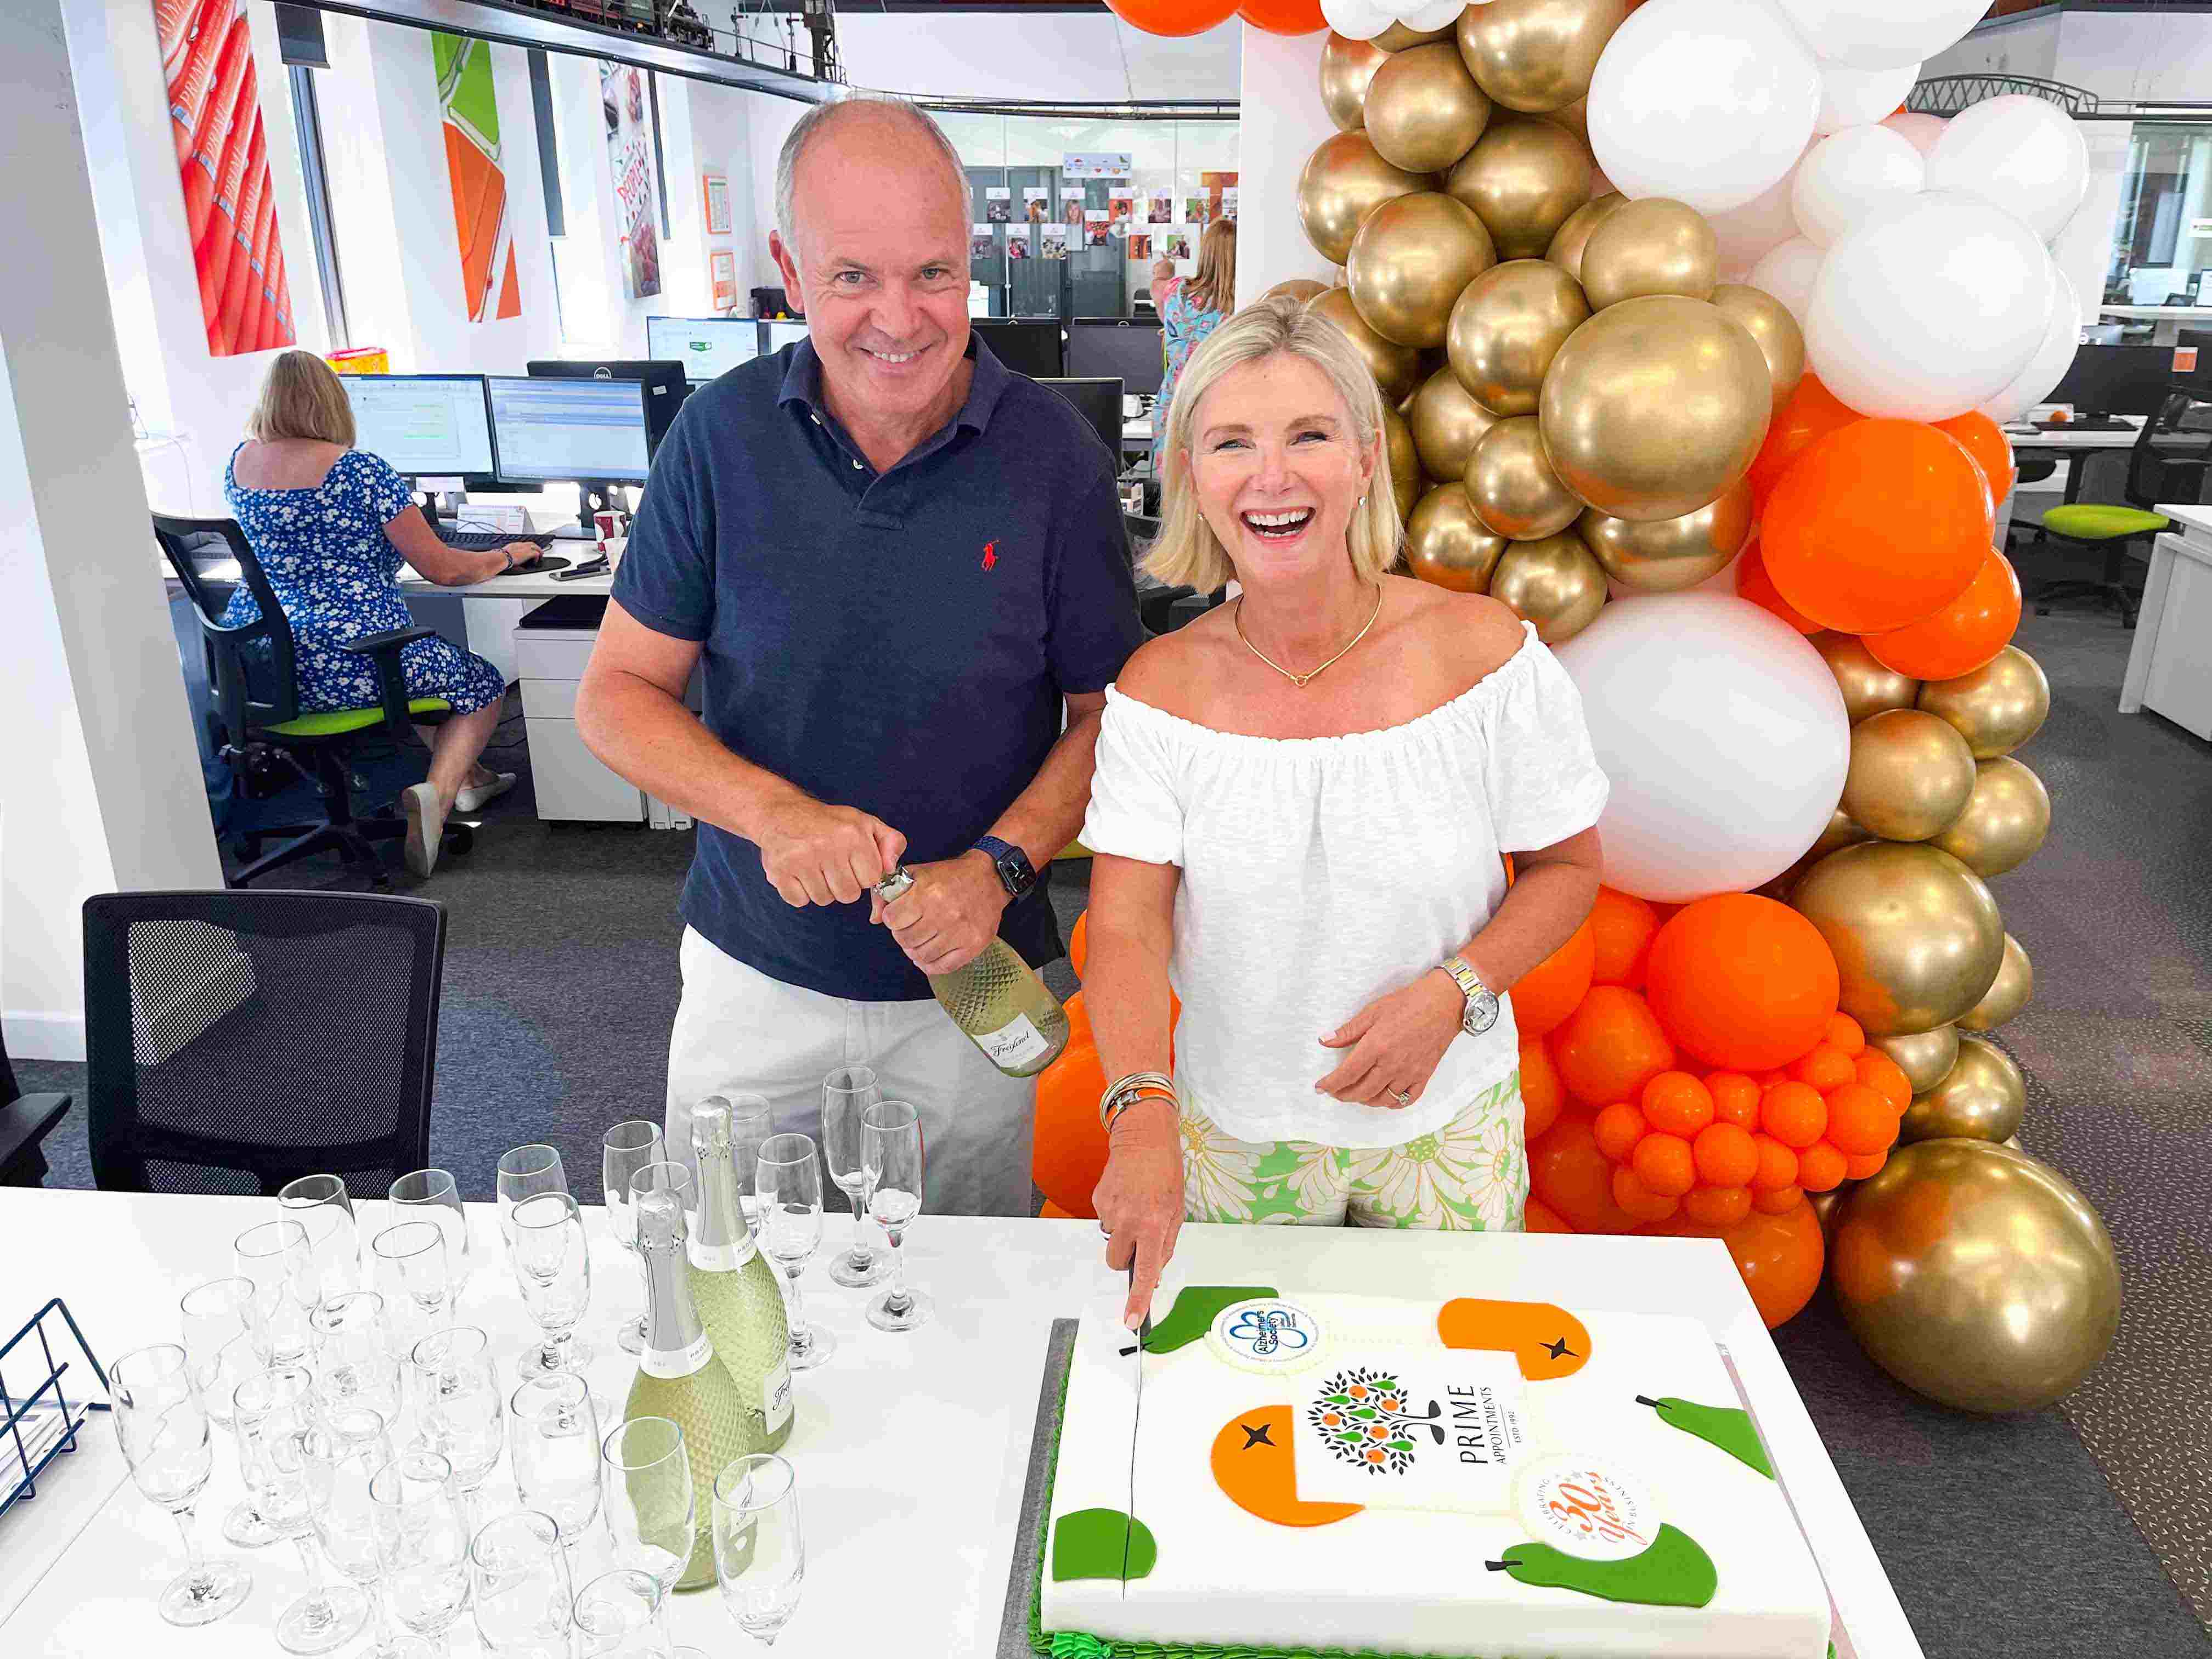 Robyn Holmes, MD & Peter Holmes, Director Cutting Cake in Prime Appointment 30th year celebrations with White, Gold & Orange Balloons in the background